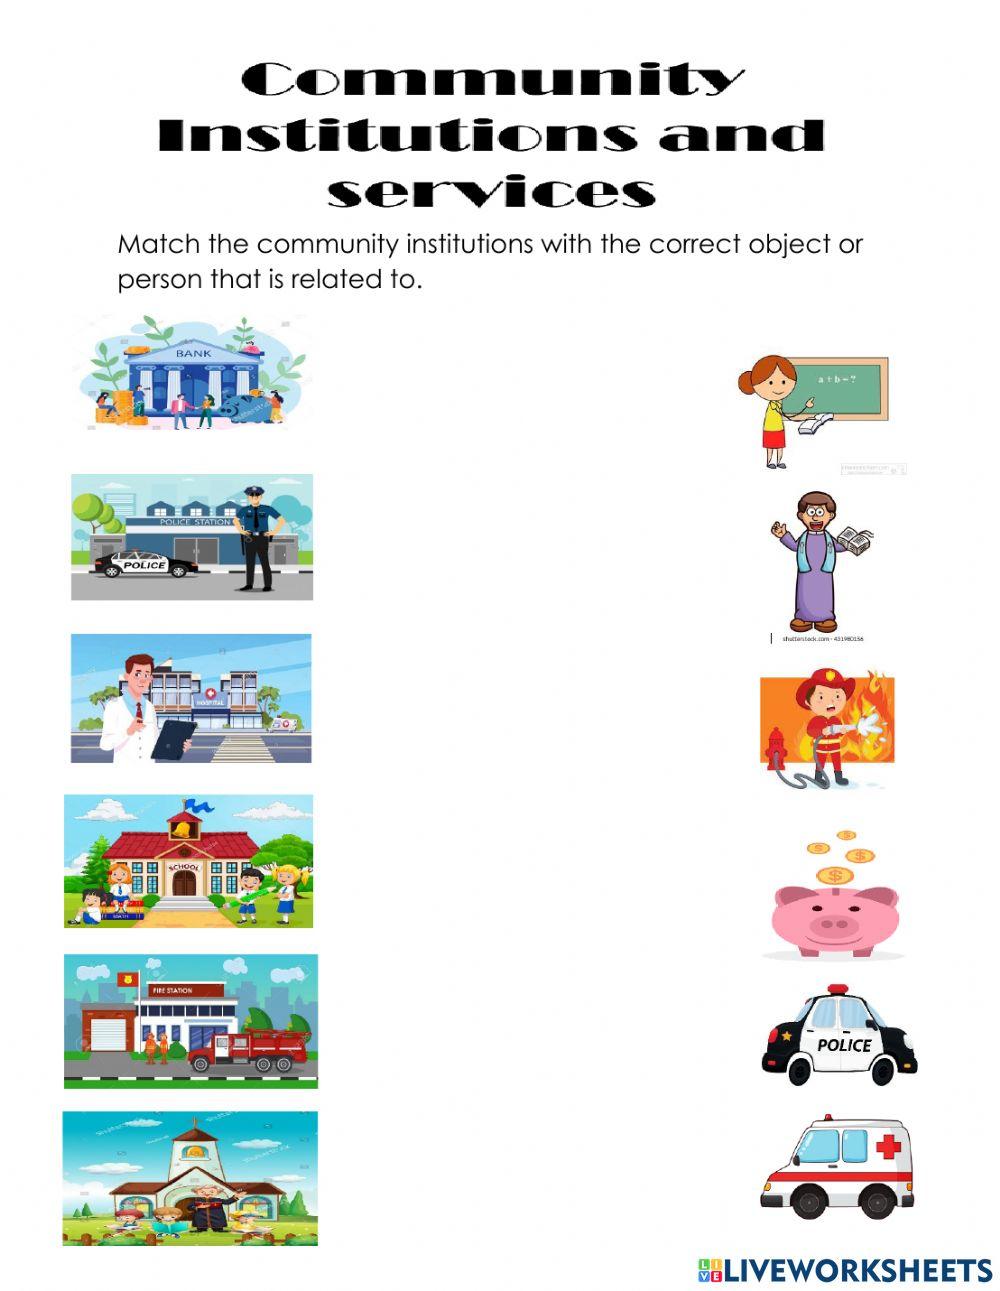 Community institutions and services